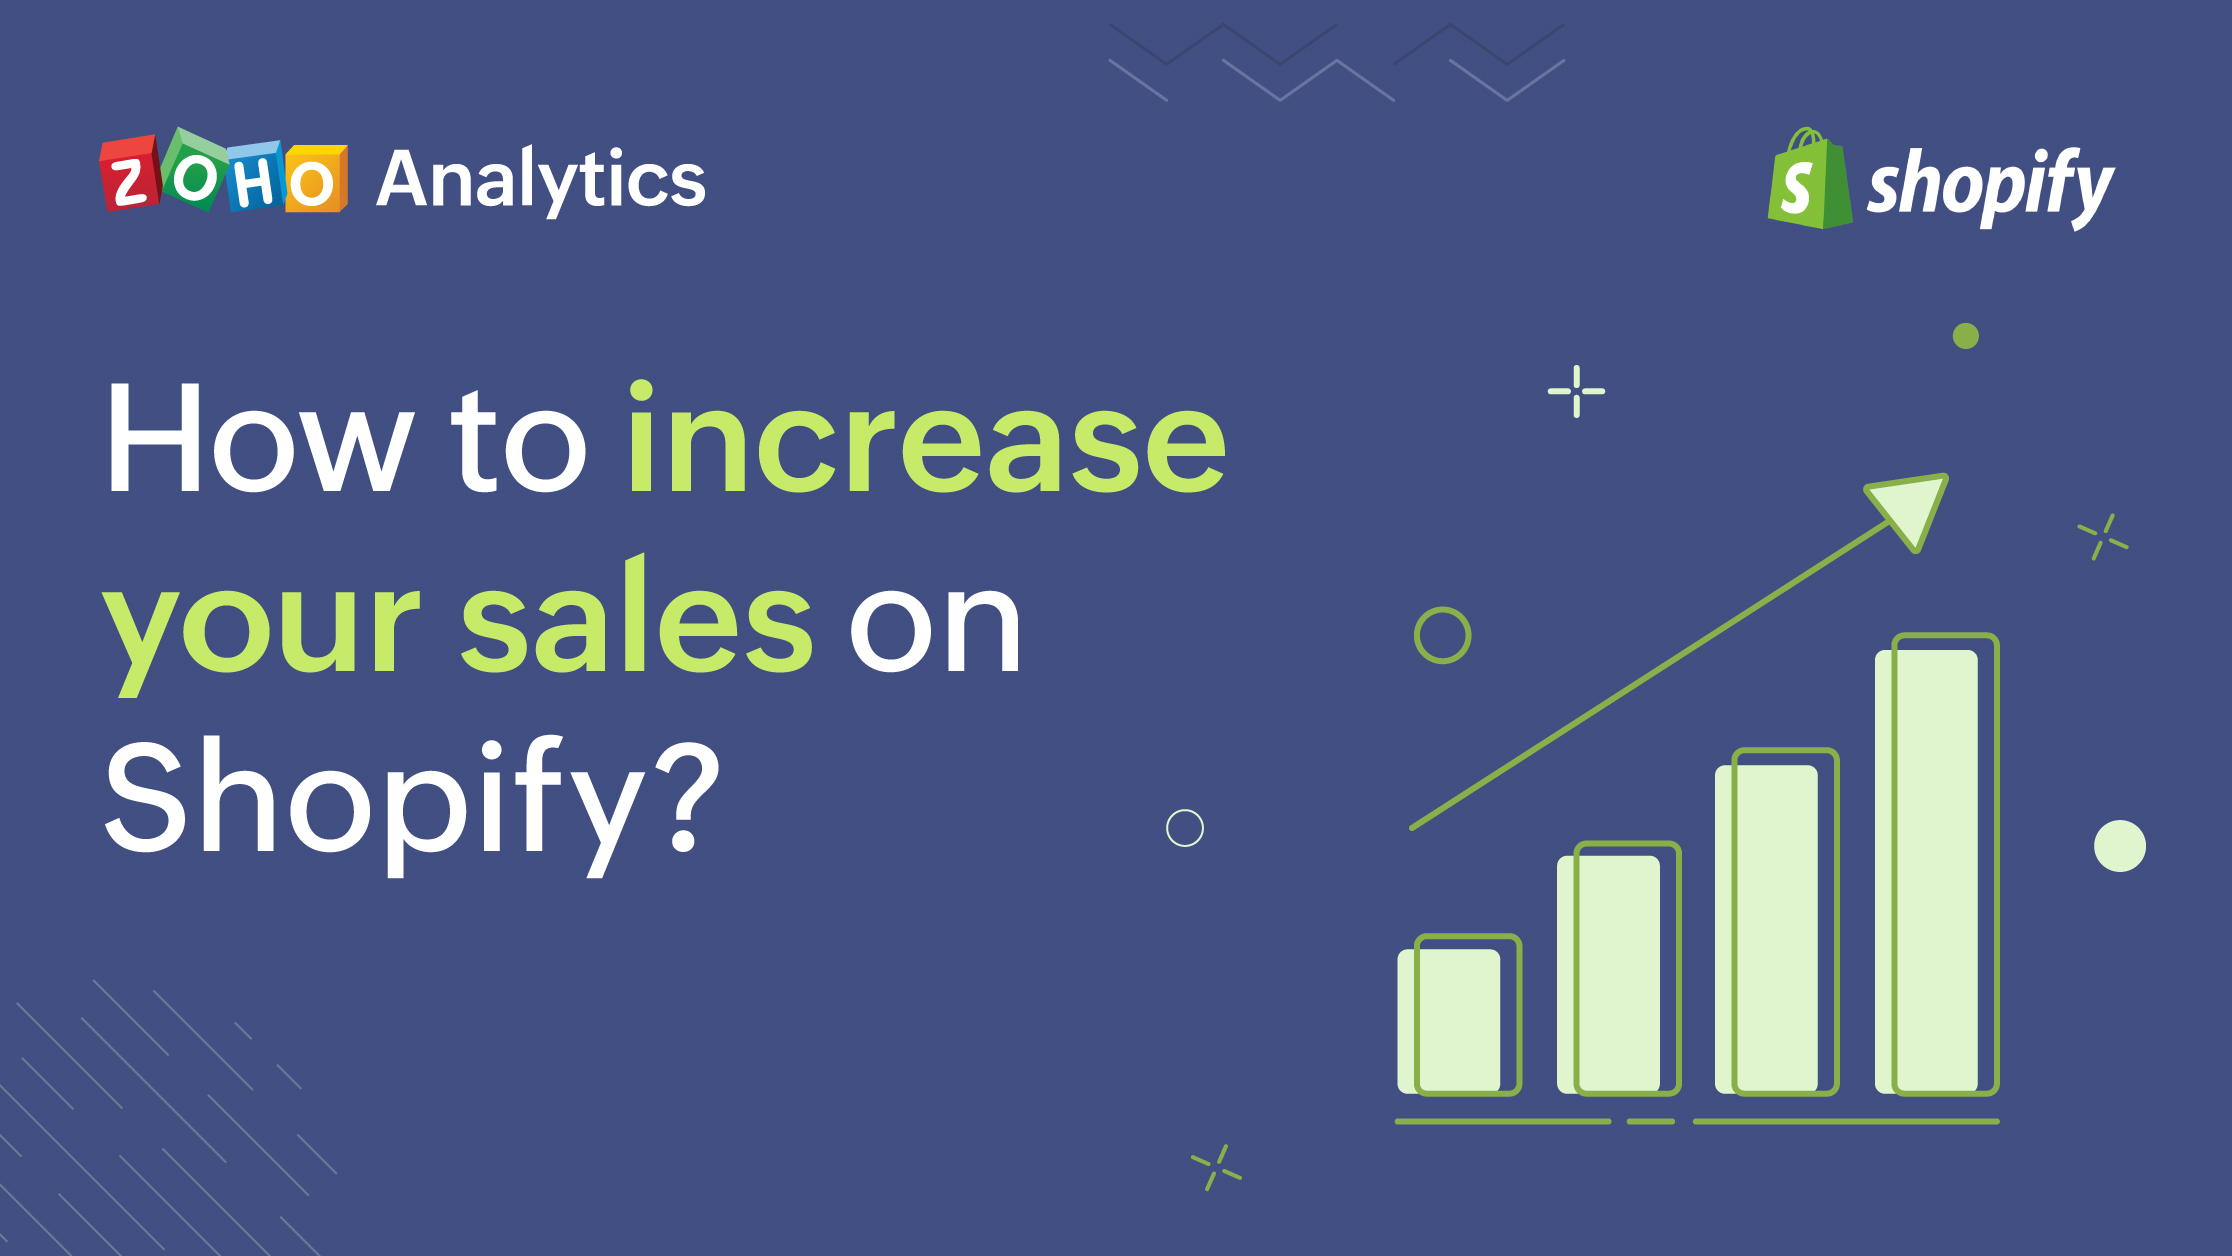 How to increase sales on Shopify